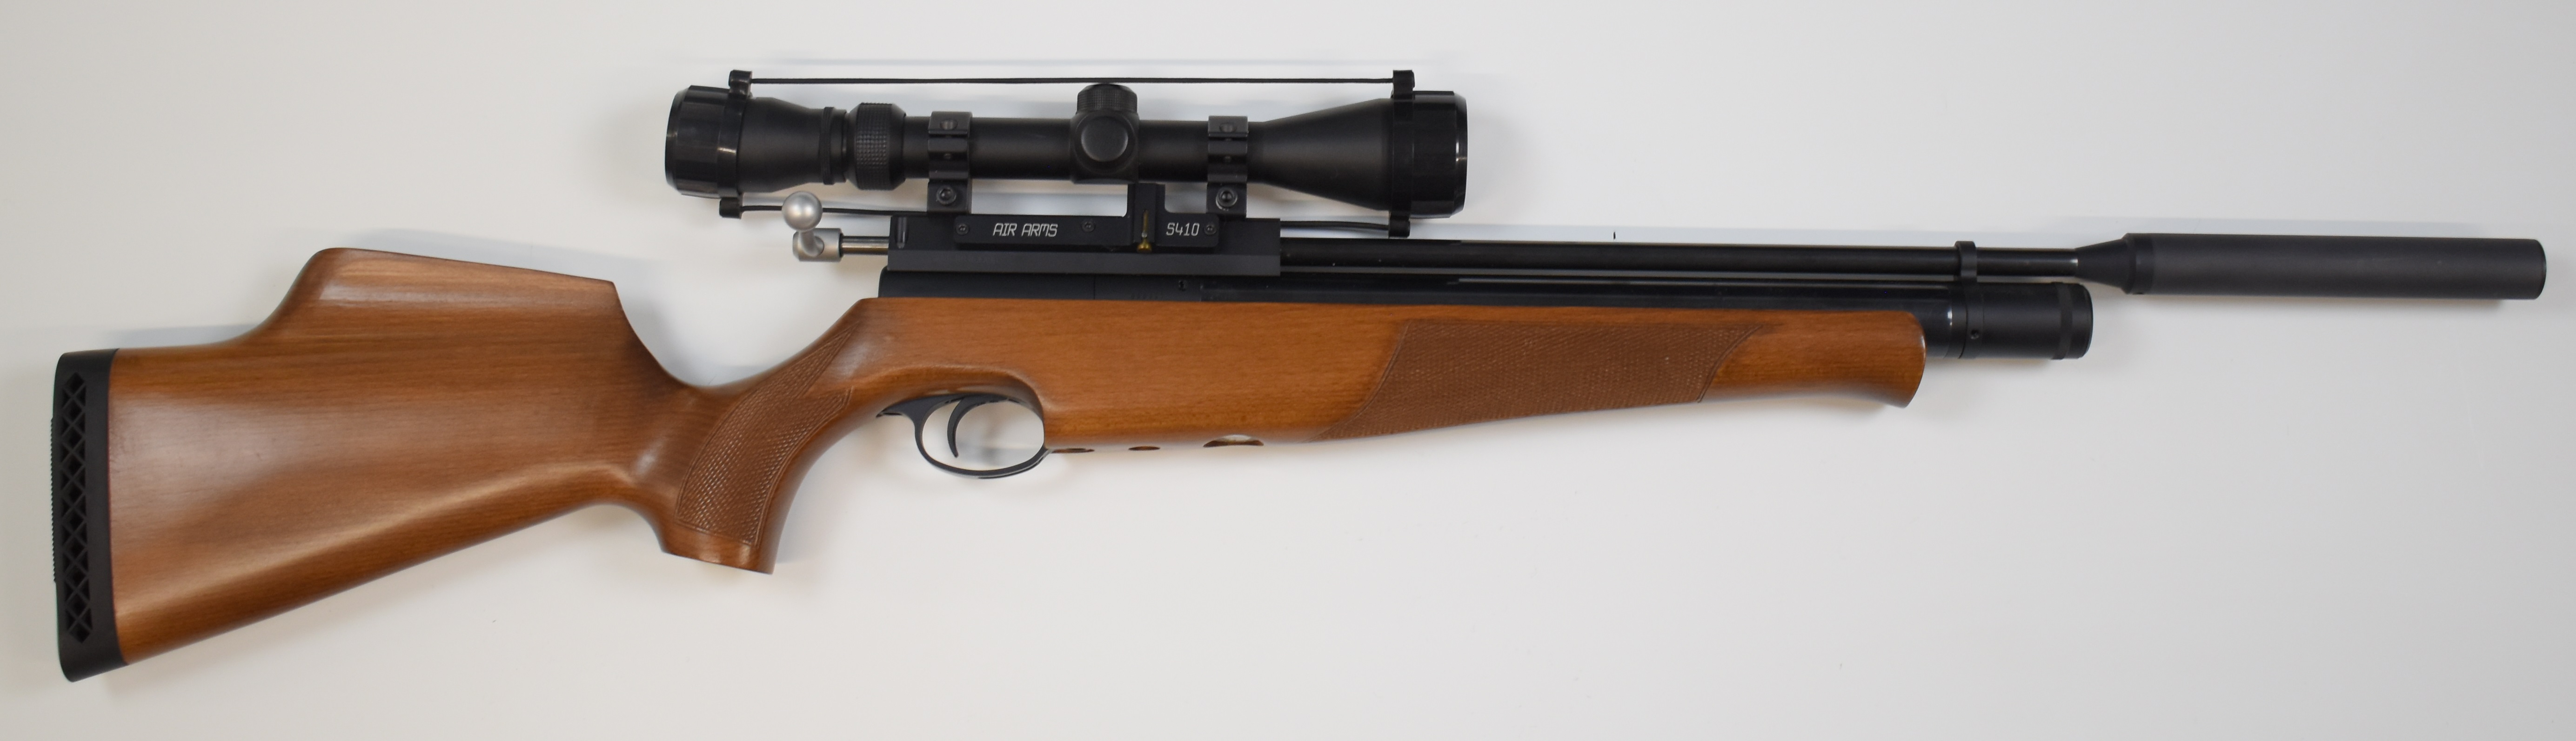 Air Arms S410 .22 PCP air rifle with chequered semi-pistol grip and forend, raised cheek piece, 10- - Image 2 of 11